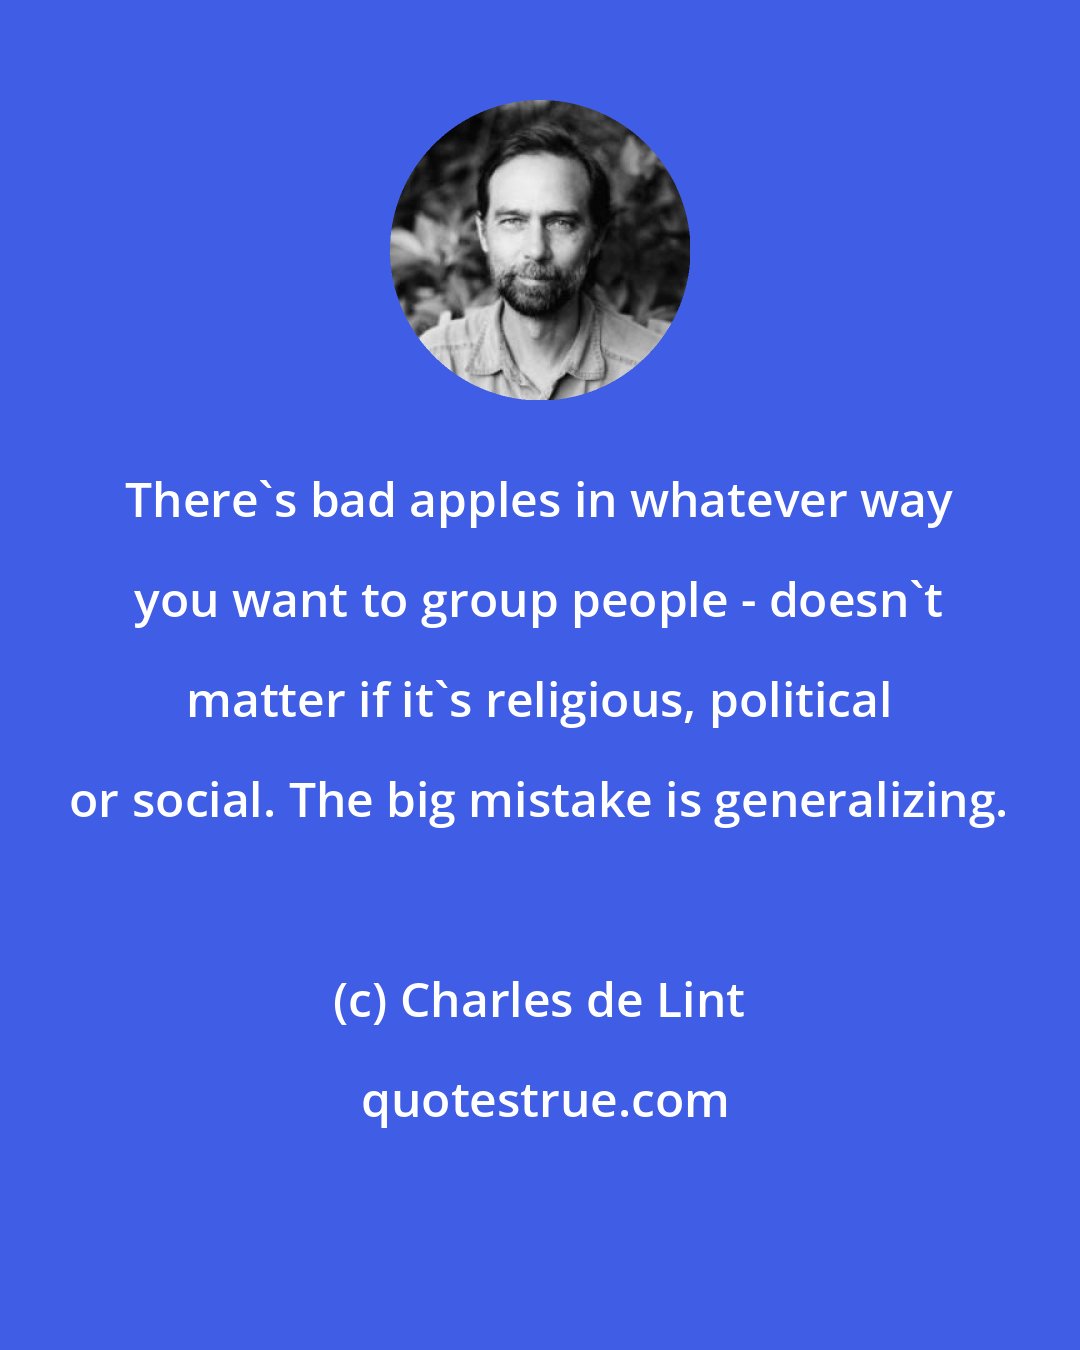 Charles de Lint: There's bad apples in whatever way you want to group people - doesn't matter if it's religious, political or social. The big mistake is generalizing.